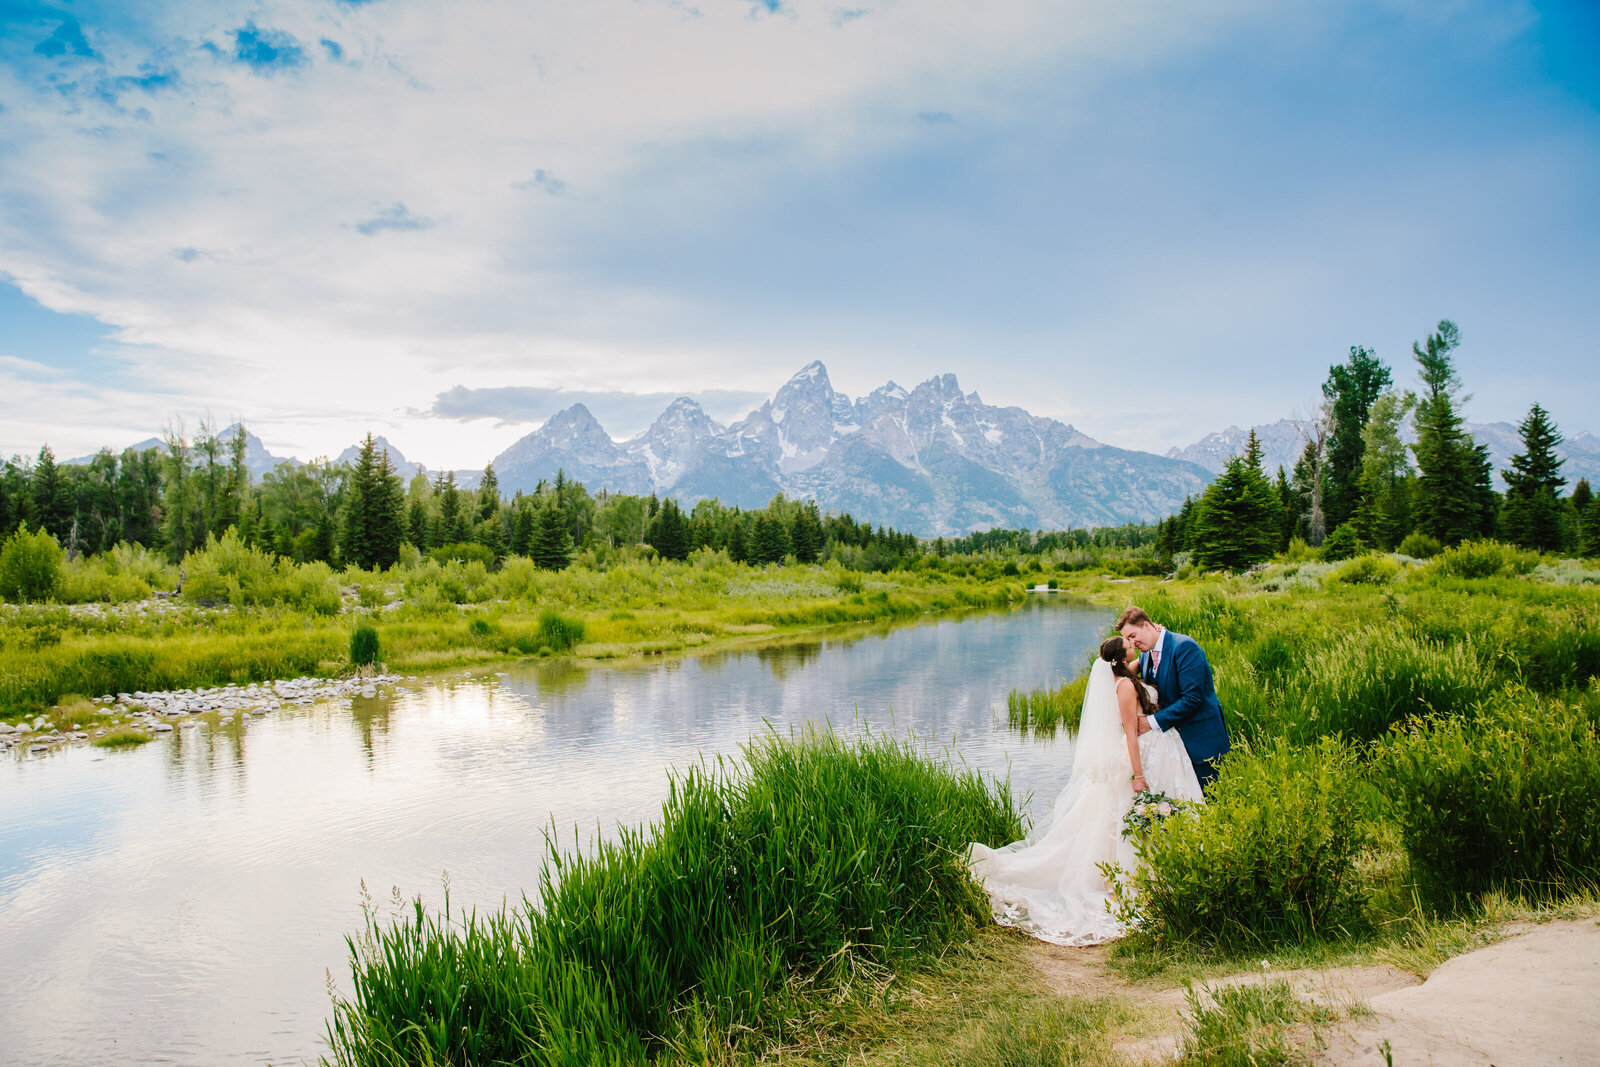 spring time jackson hole wedding at schwbachers landing in grand teton national park. The  bride and groom are kissing by the waters edge and the sky is bright blue